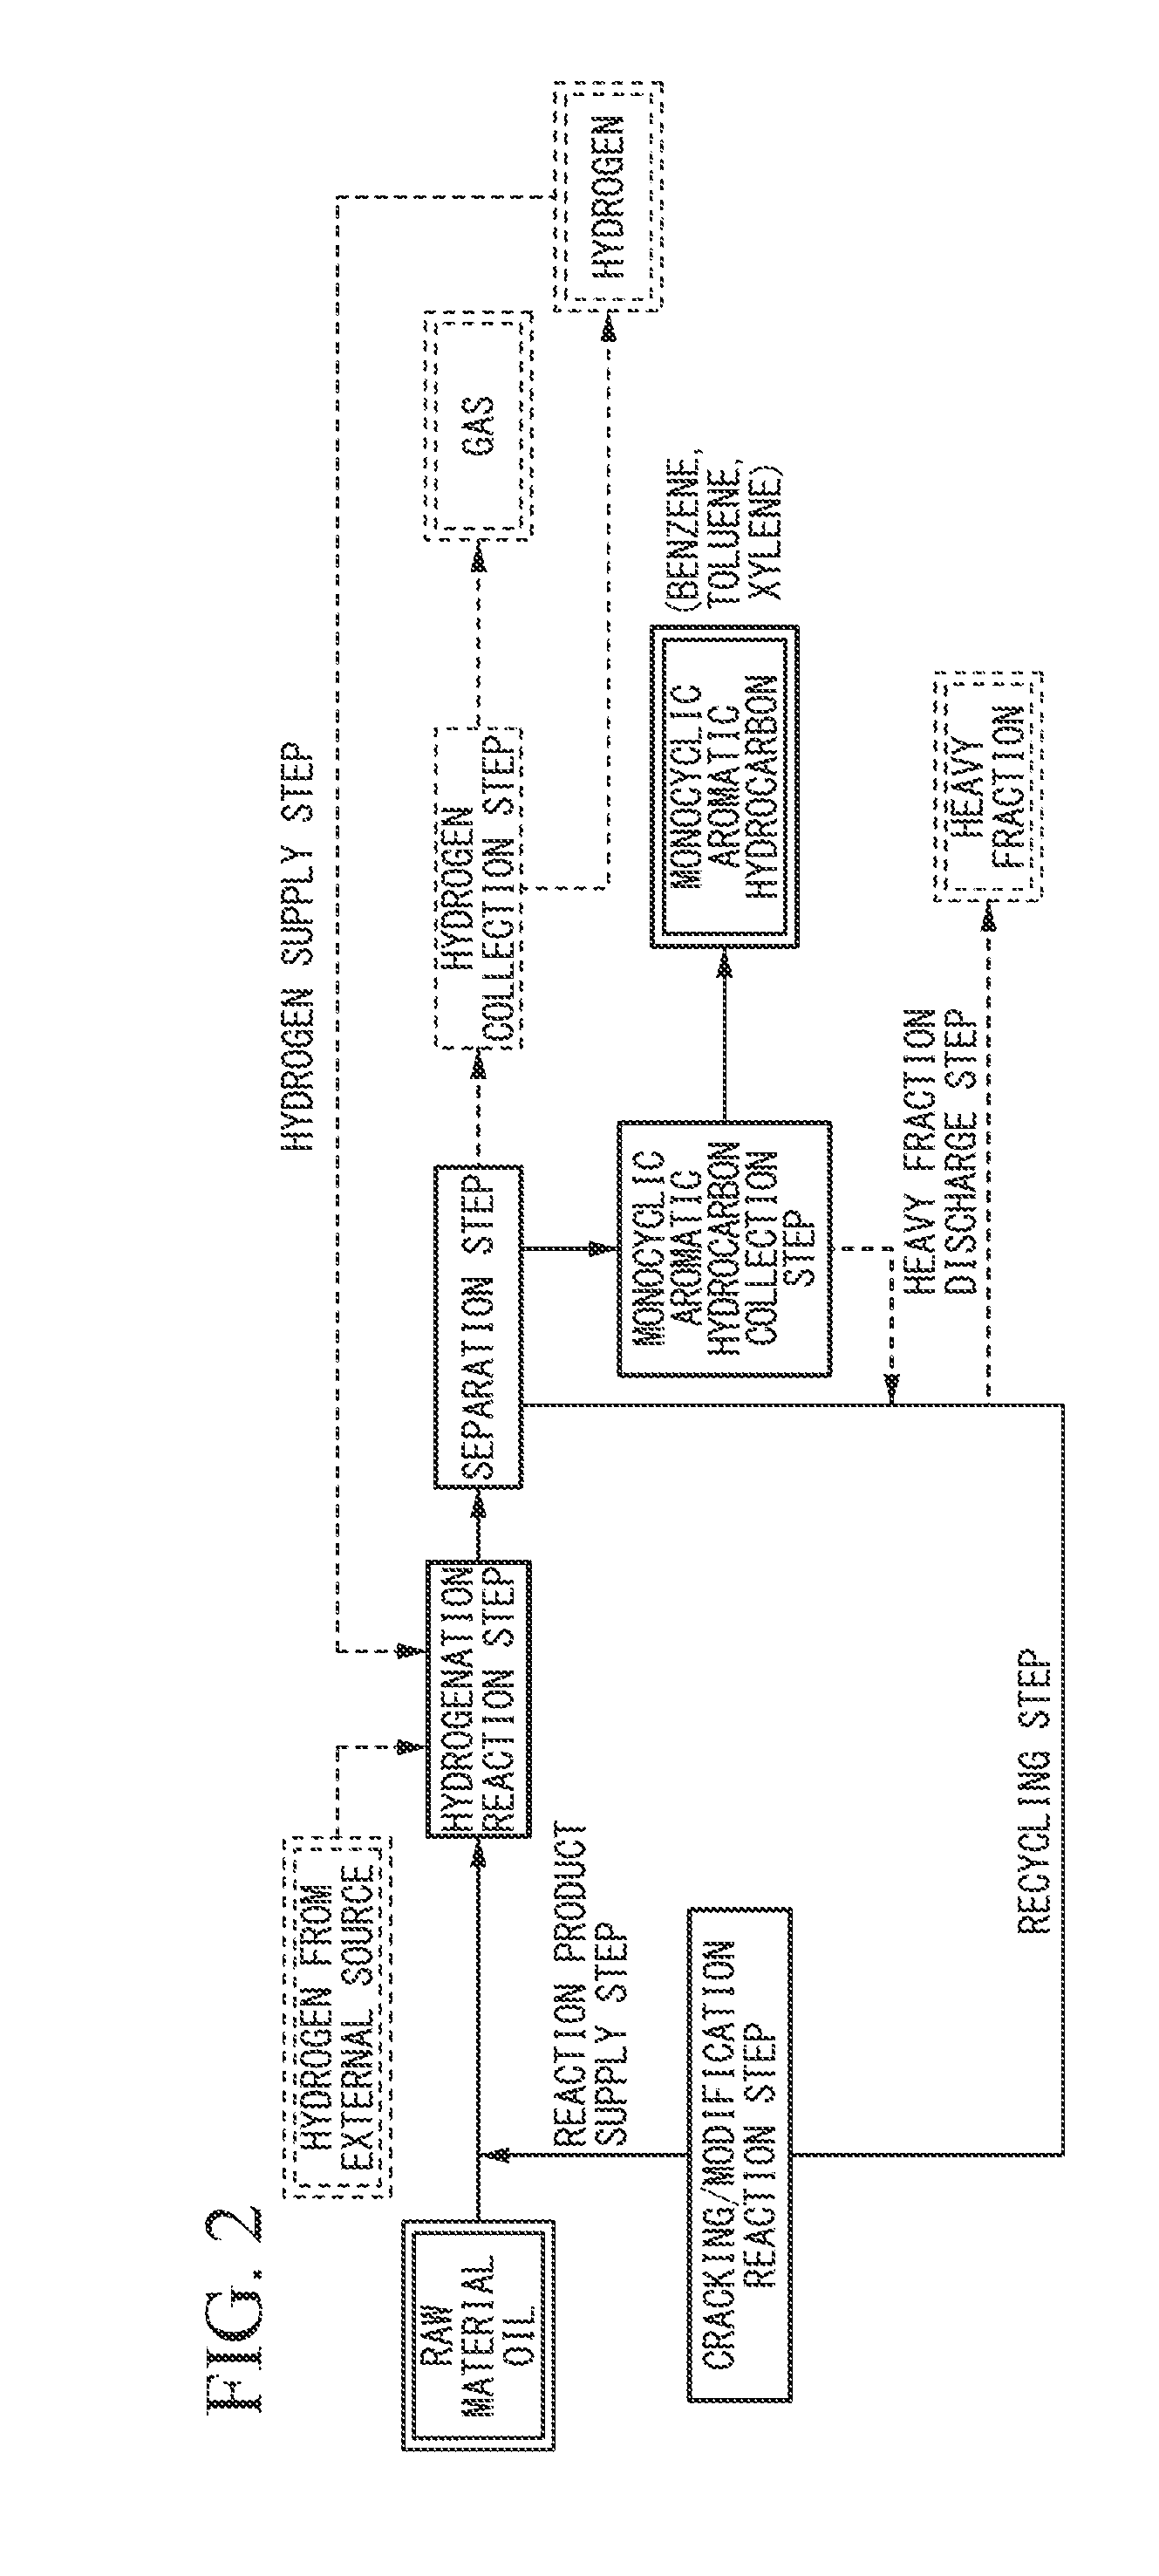 Method for producing monocyclic aromatic hydrocarbons